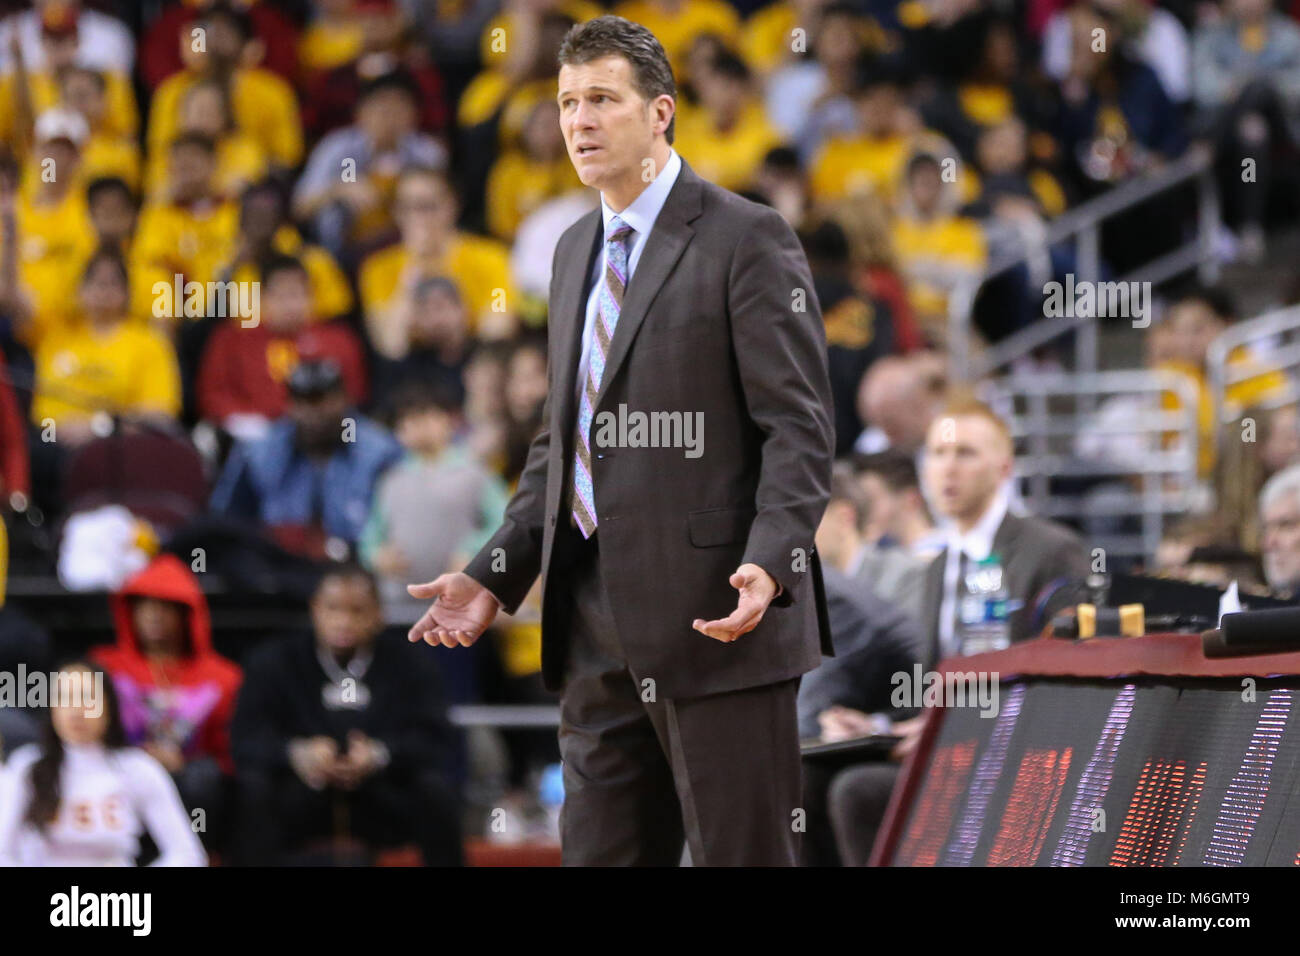 LOS ANGELES, CA - March 3: UCLA Bruins head coach Steve Alford in a NCAA Basketball game between the UCLA Bruins vs USC Trojans at the Galen Center in Los Angeles, CA: (Photo by Jordon Kelly/Icon Sportswire) Credit: Cal Sport Media/Alamy Live News Stock Photo